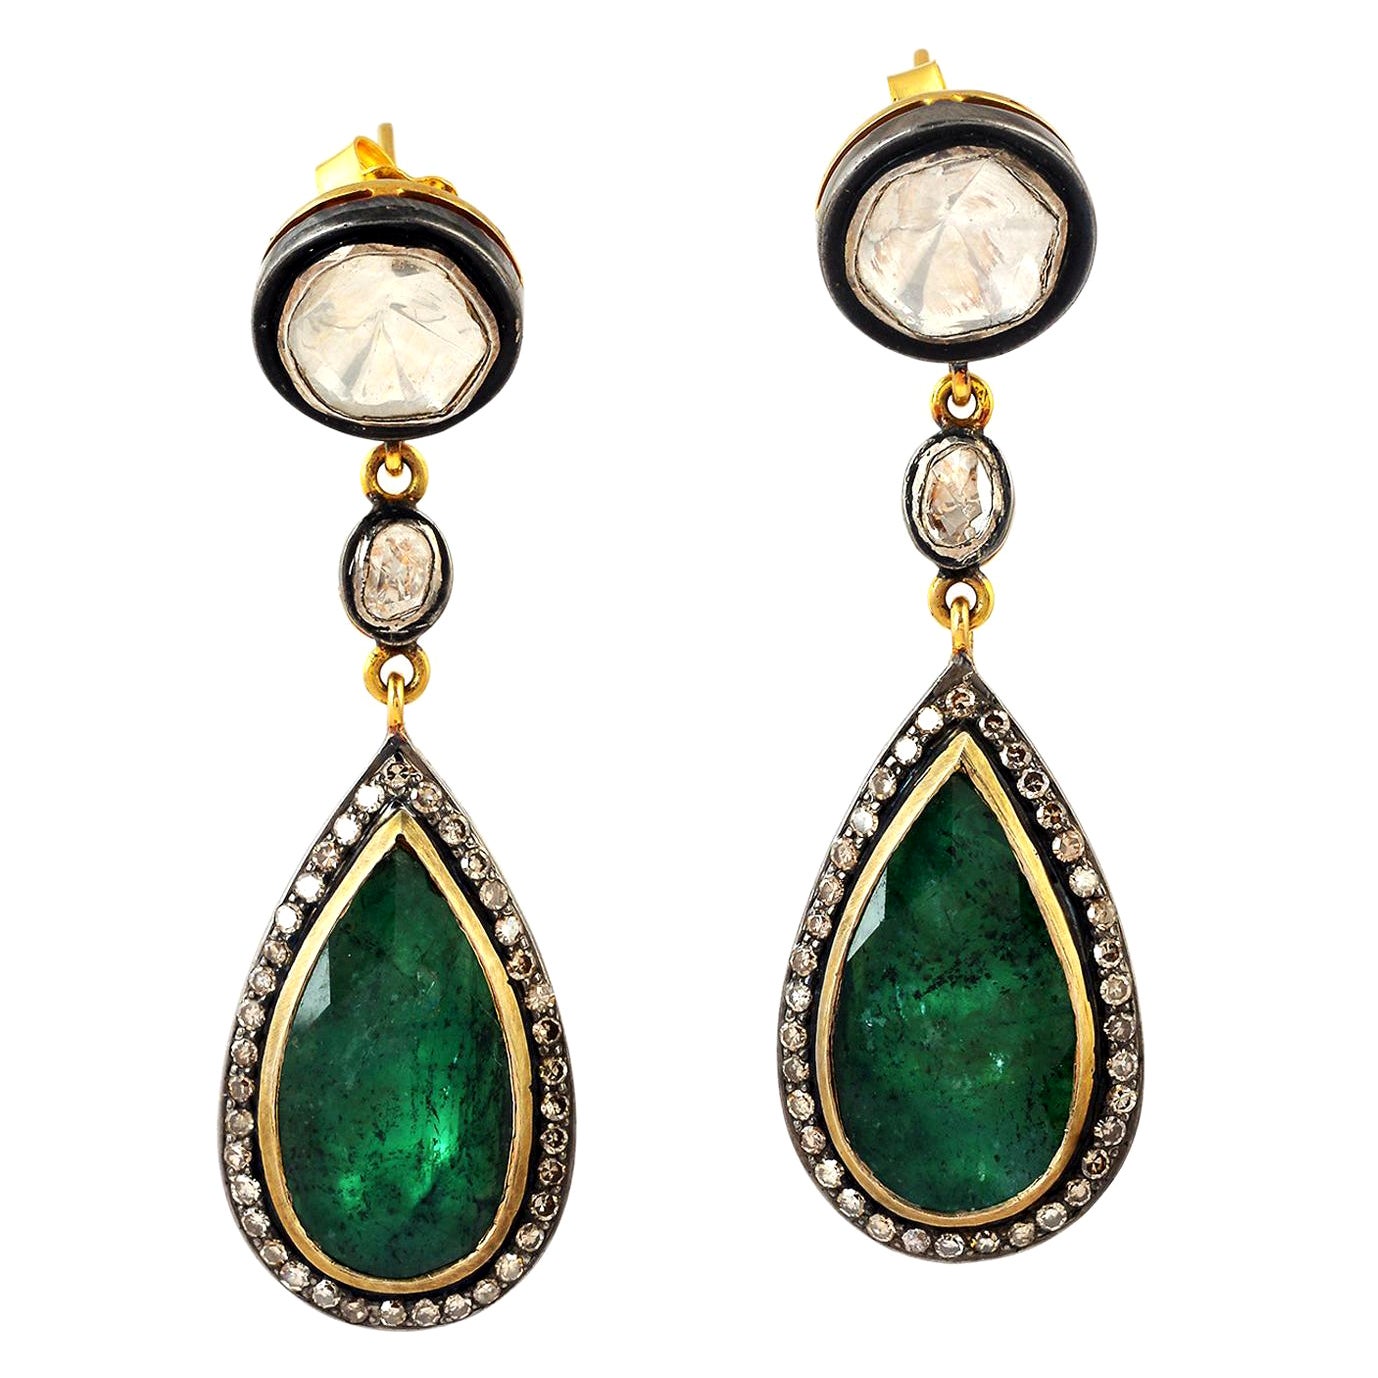 Pear Shaped Emerald Earring With Diamonds Made In 14k Gold & Silver For Sale